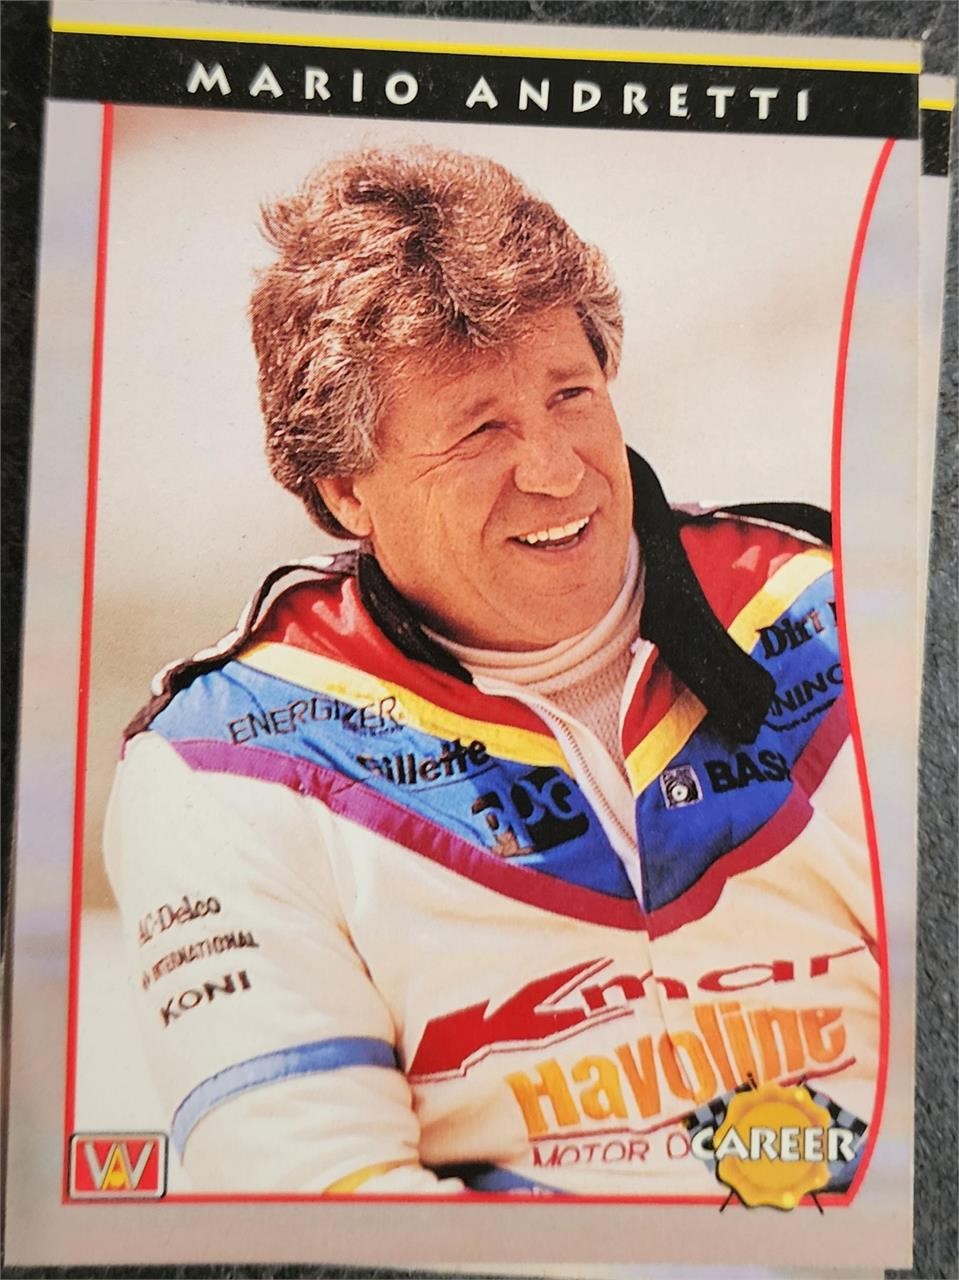 1992 Mario Andretti all world Indy Carrier card